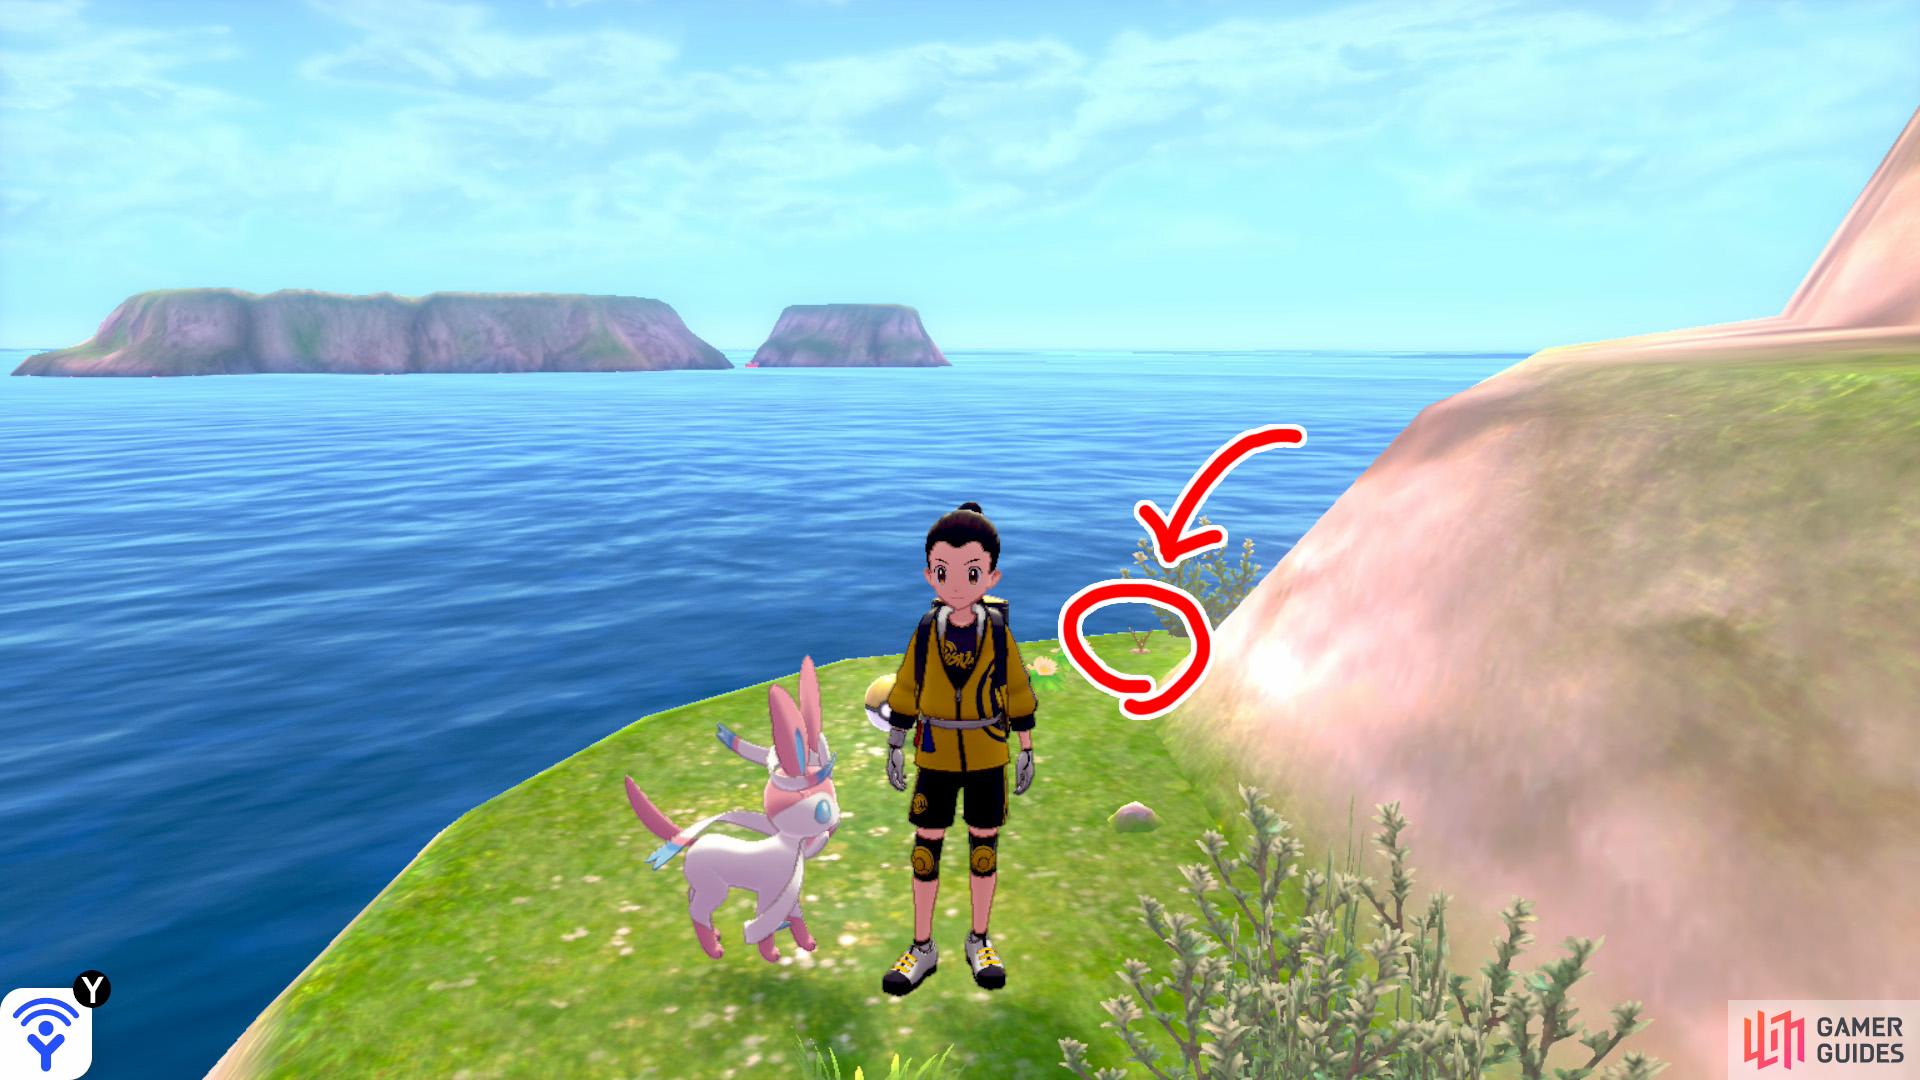 4/7: From Diglett 3, head back towards the shore, but turn right while facing the ocean/mainland. Head into the narrow path, where the Pokémon Den is. The final Diglett on this island is at the end of this path, near the gold item ball.